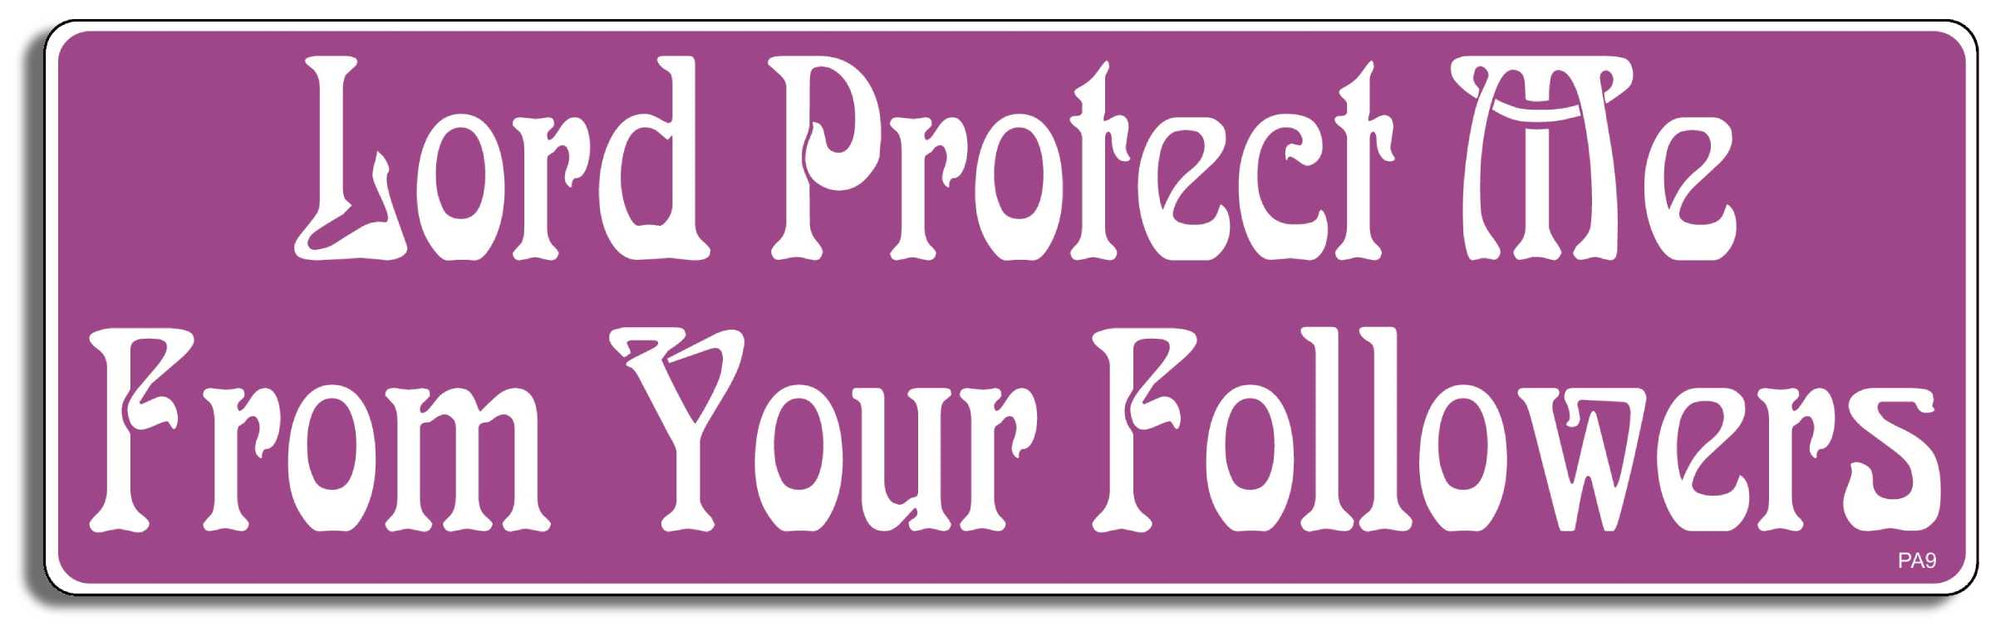 Lord protect me from your followers - 3" x 10" Bumper Sticker--Car Magnet- -  Decal Bumper Sticker-pagan Bumper Sticker Car Magnet Lord protect me from your followers-  Decal for carsatheist, pagan, wiccan, witch